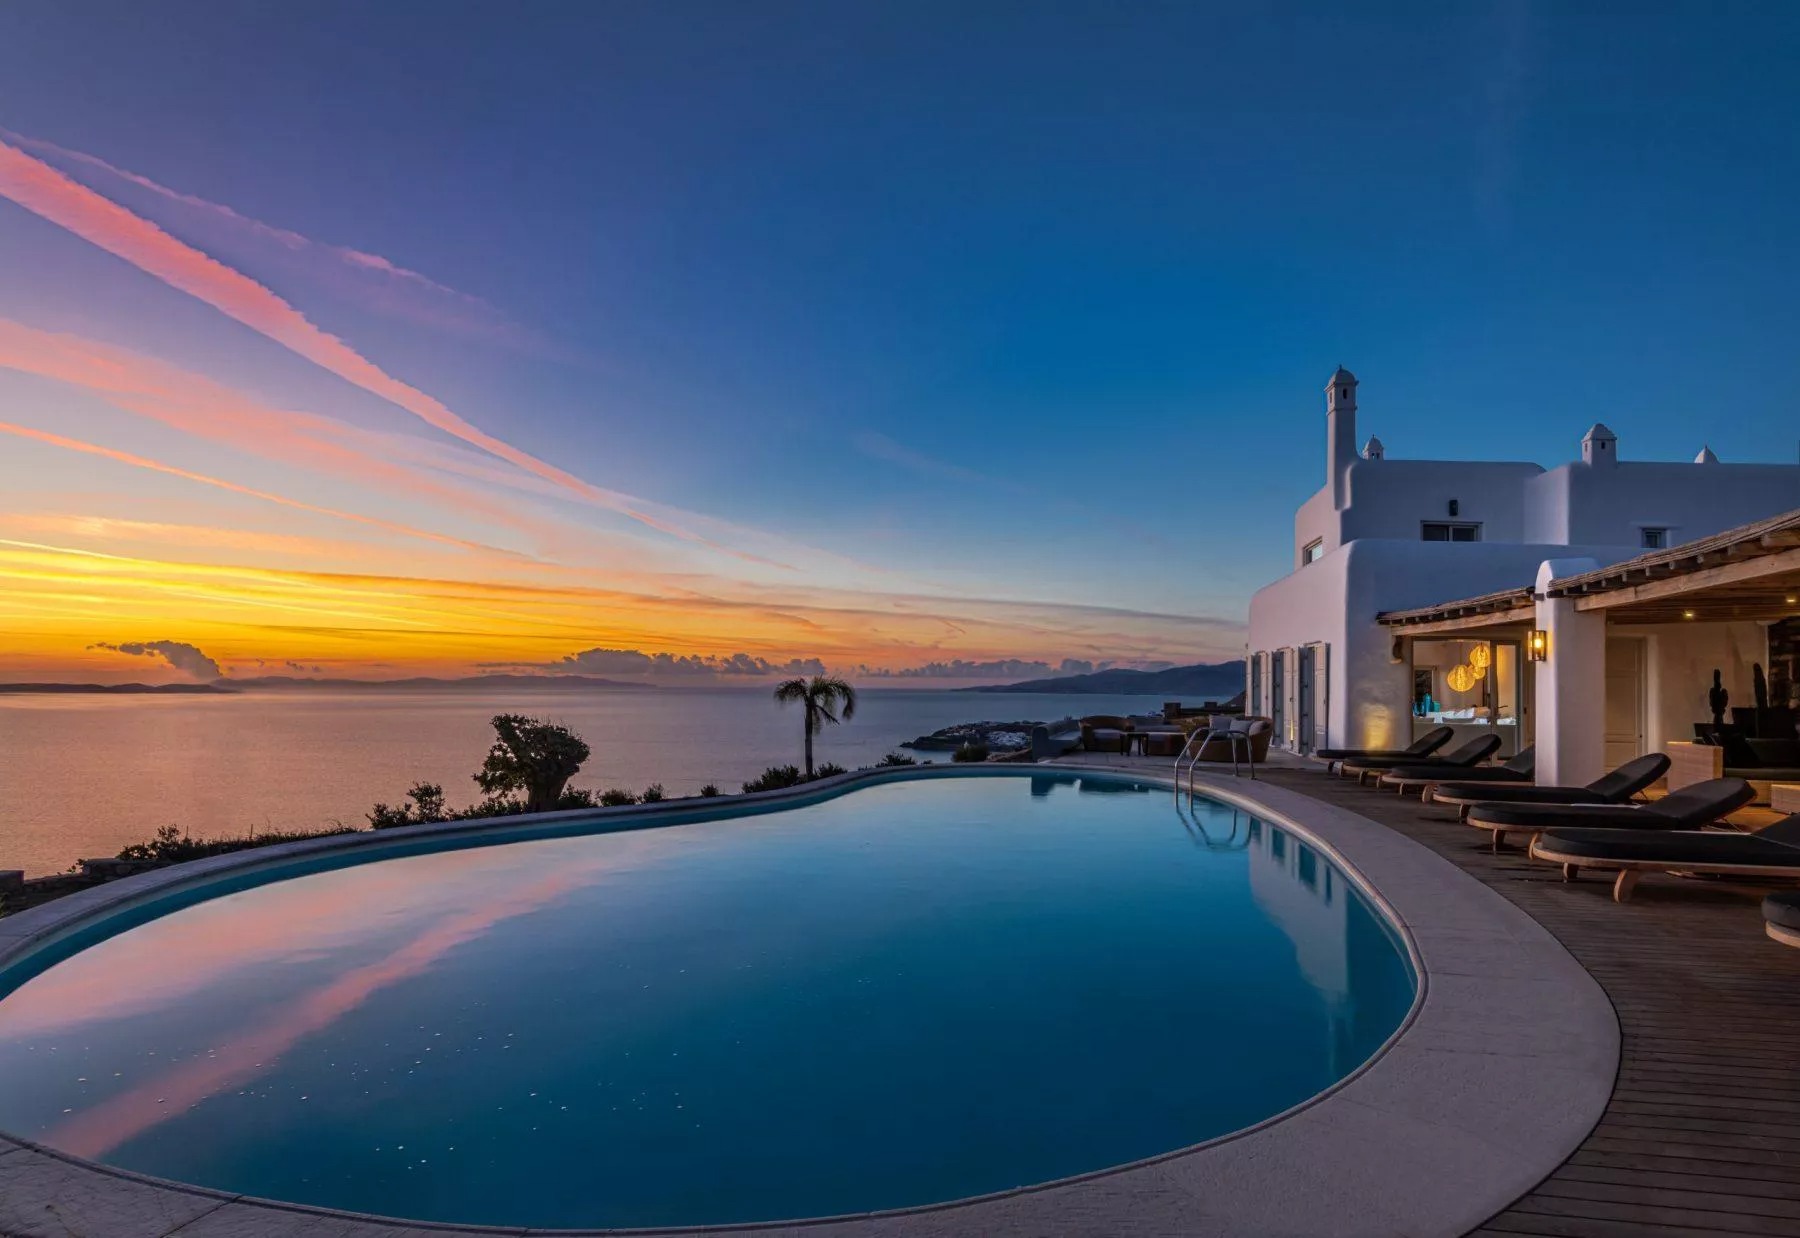 Be Aware of These Things When Renting a Luxury Villas